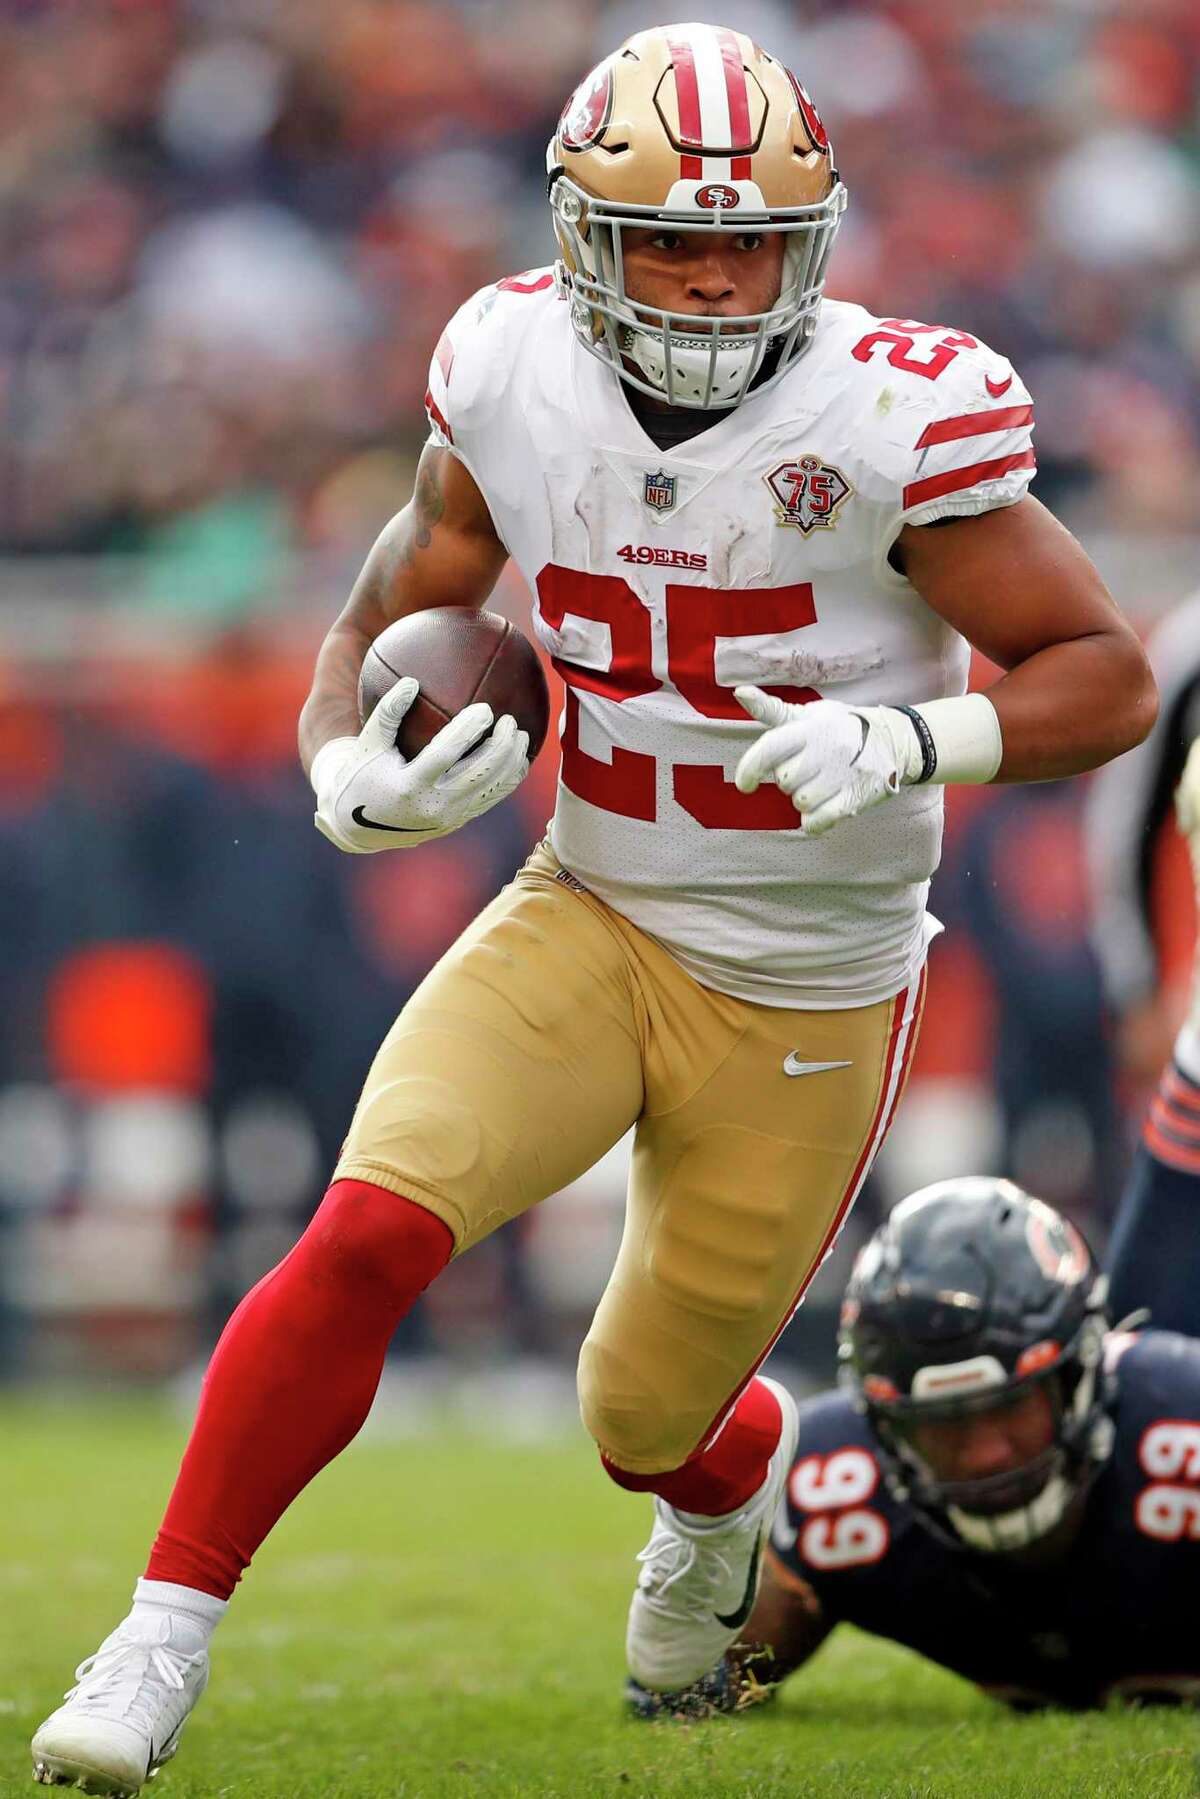 San Francisco 49ers' Elijah Mitchell rushes past Chicago Bears' Trevis Gipson in 4th quarter of Niners' 33-22 win in NFL game at Soldier Field in Chicago, IL on Sunday, October 31, 2021.